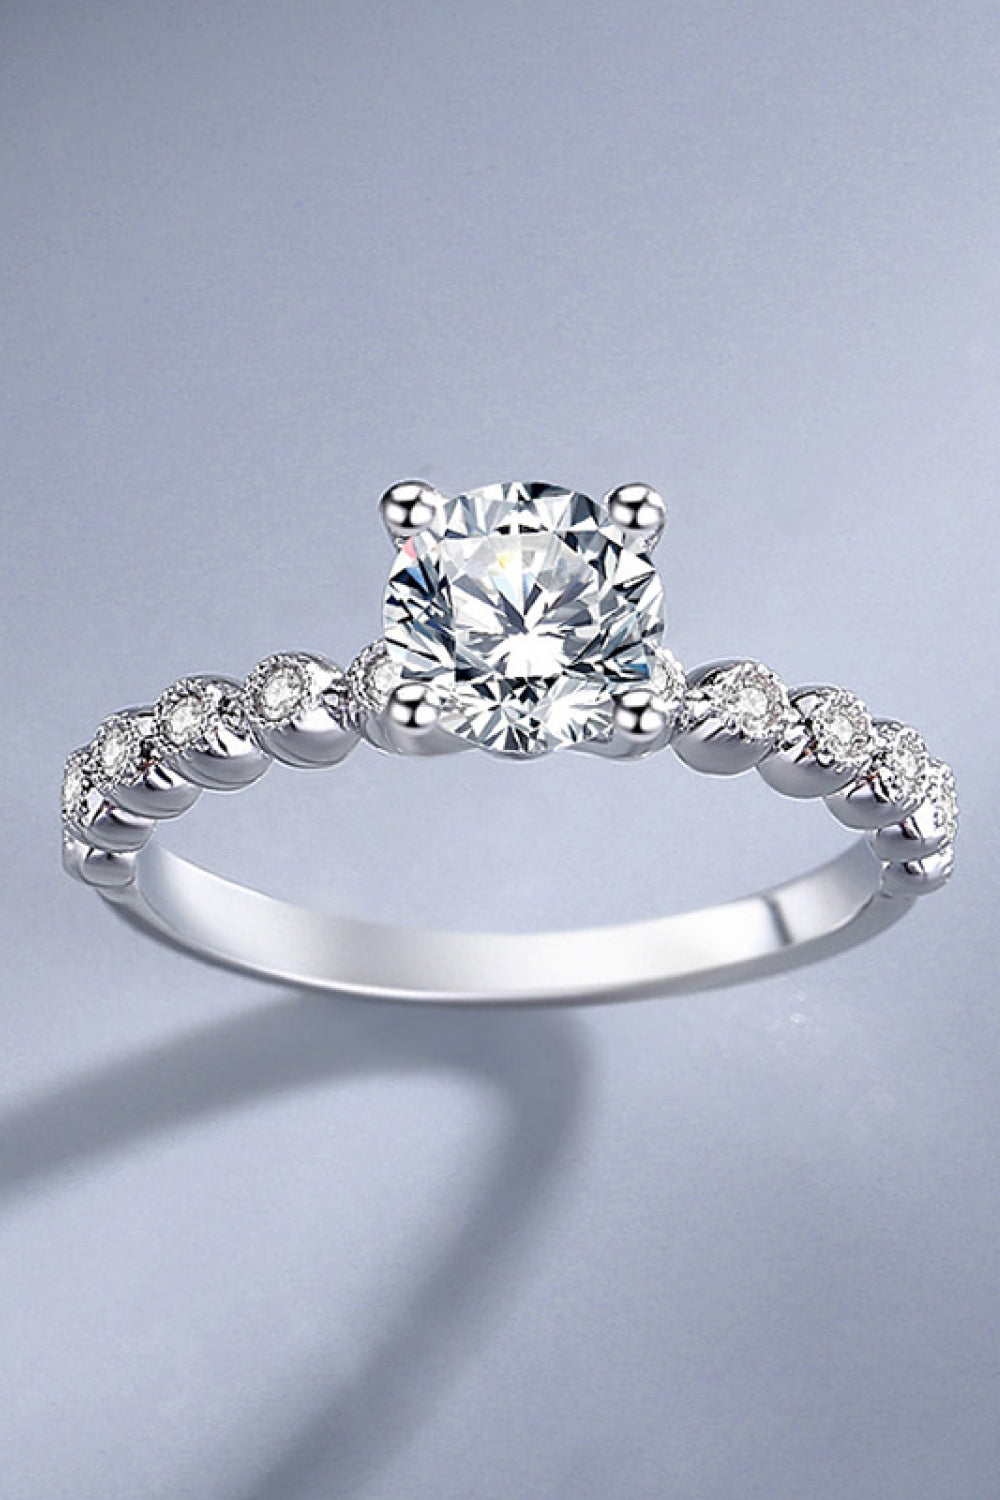 Classic 4-Prong Moissanite Ring COCO CRESS